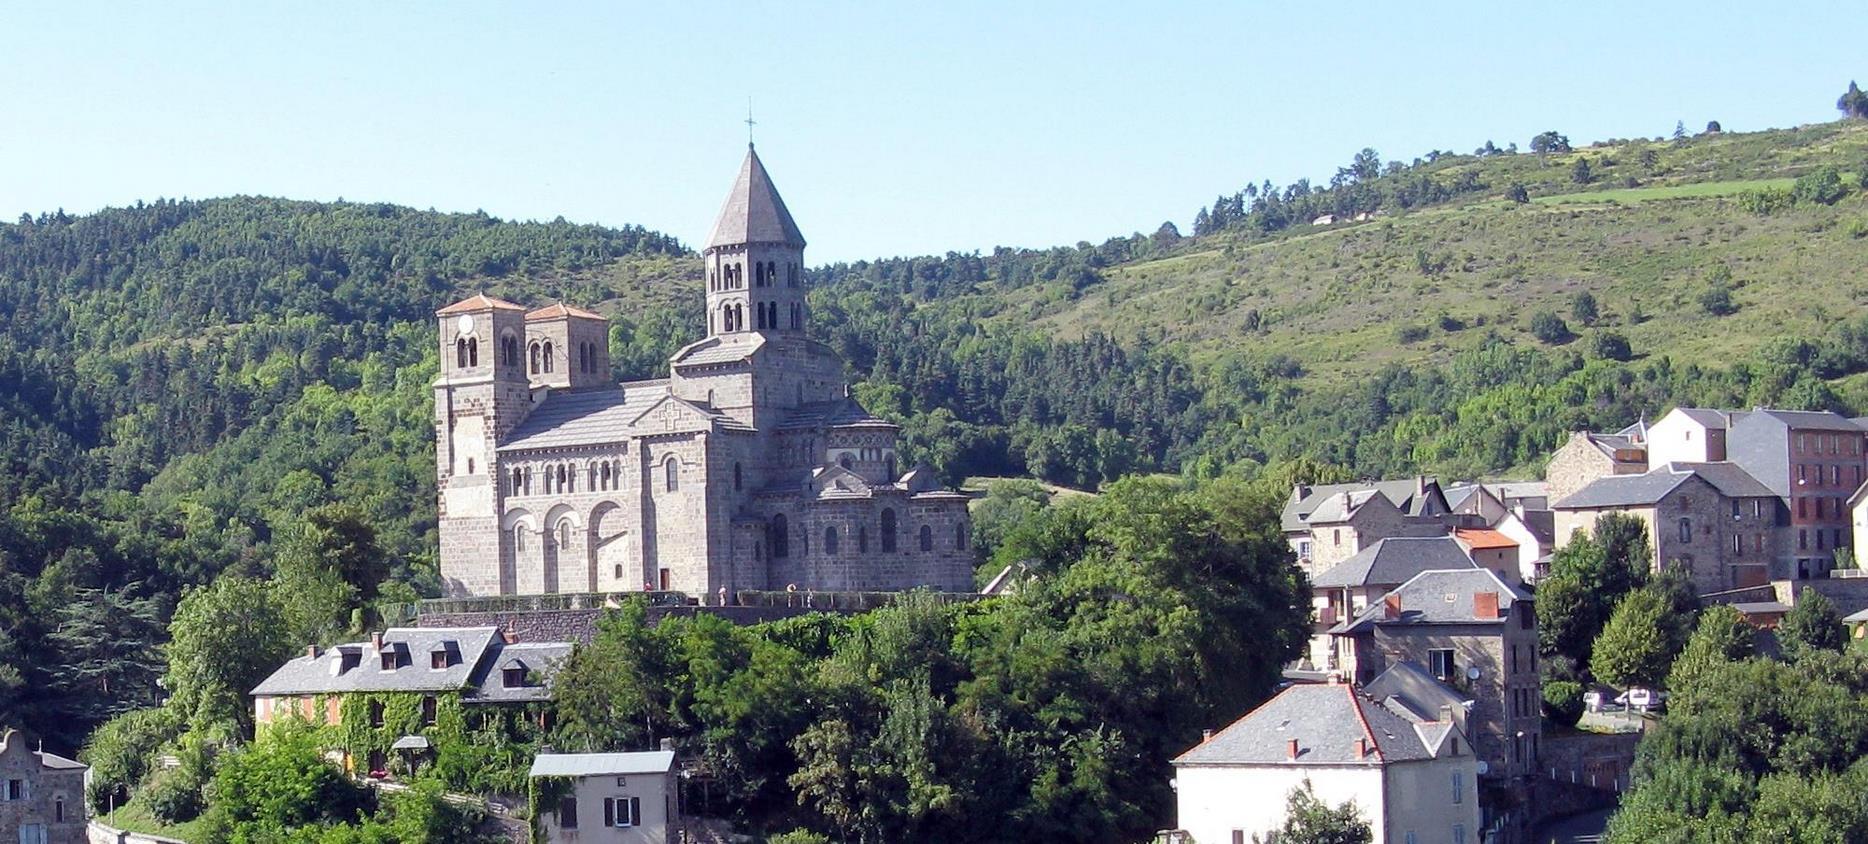 Saint Nectaire - Church overlooking the Village of St Nectaire in Auvergne